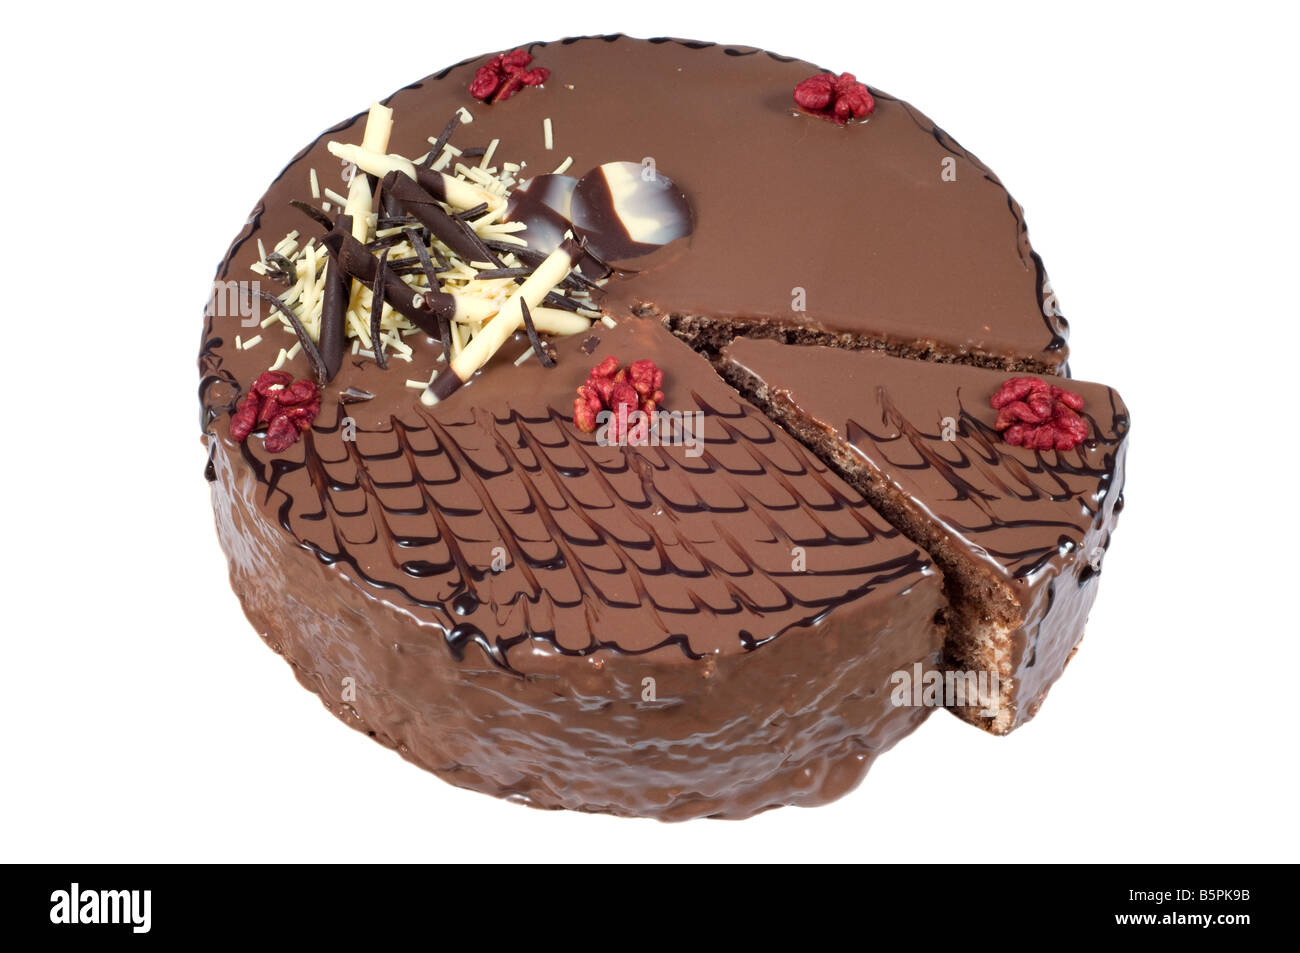 Cut birthday cake with walnuts and decoration on white background. Stock Photo